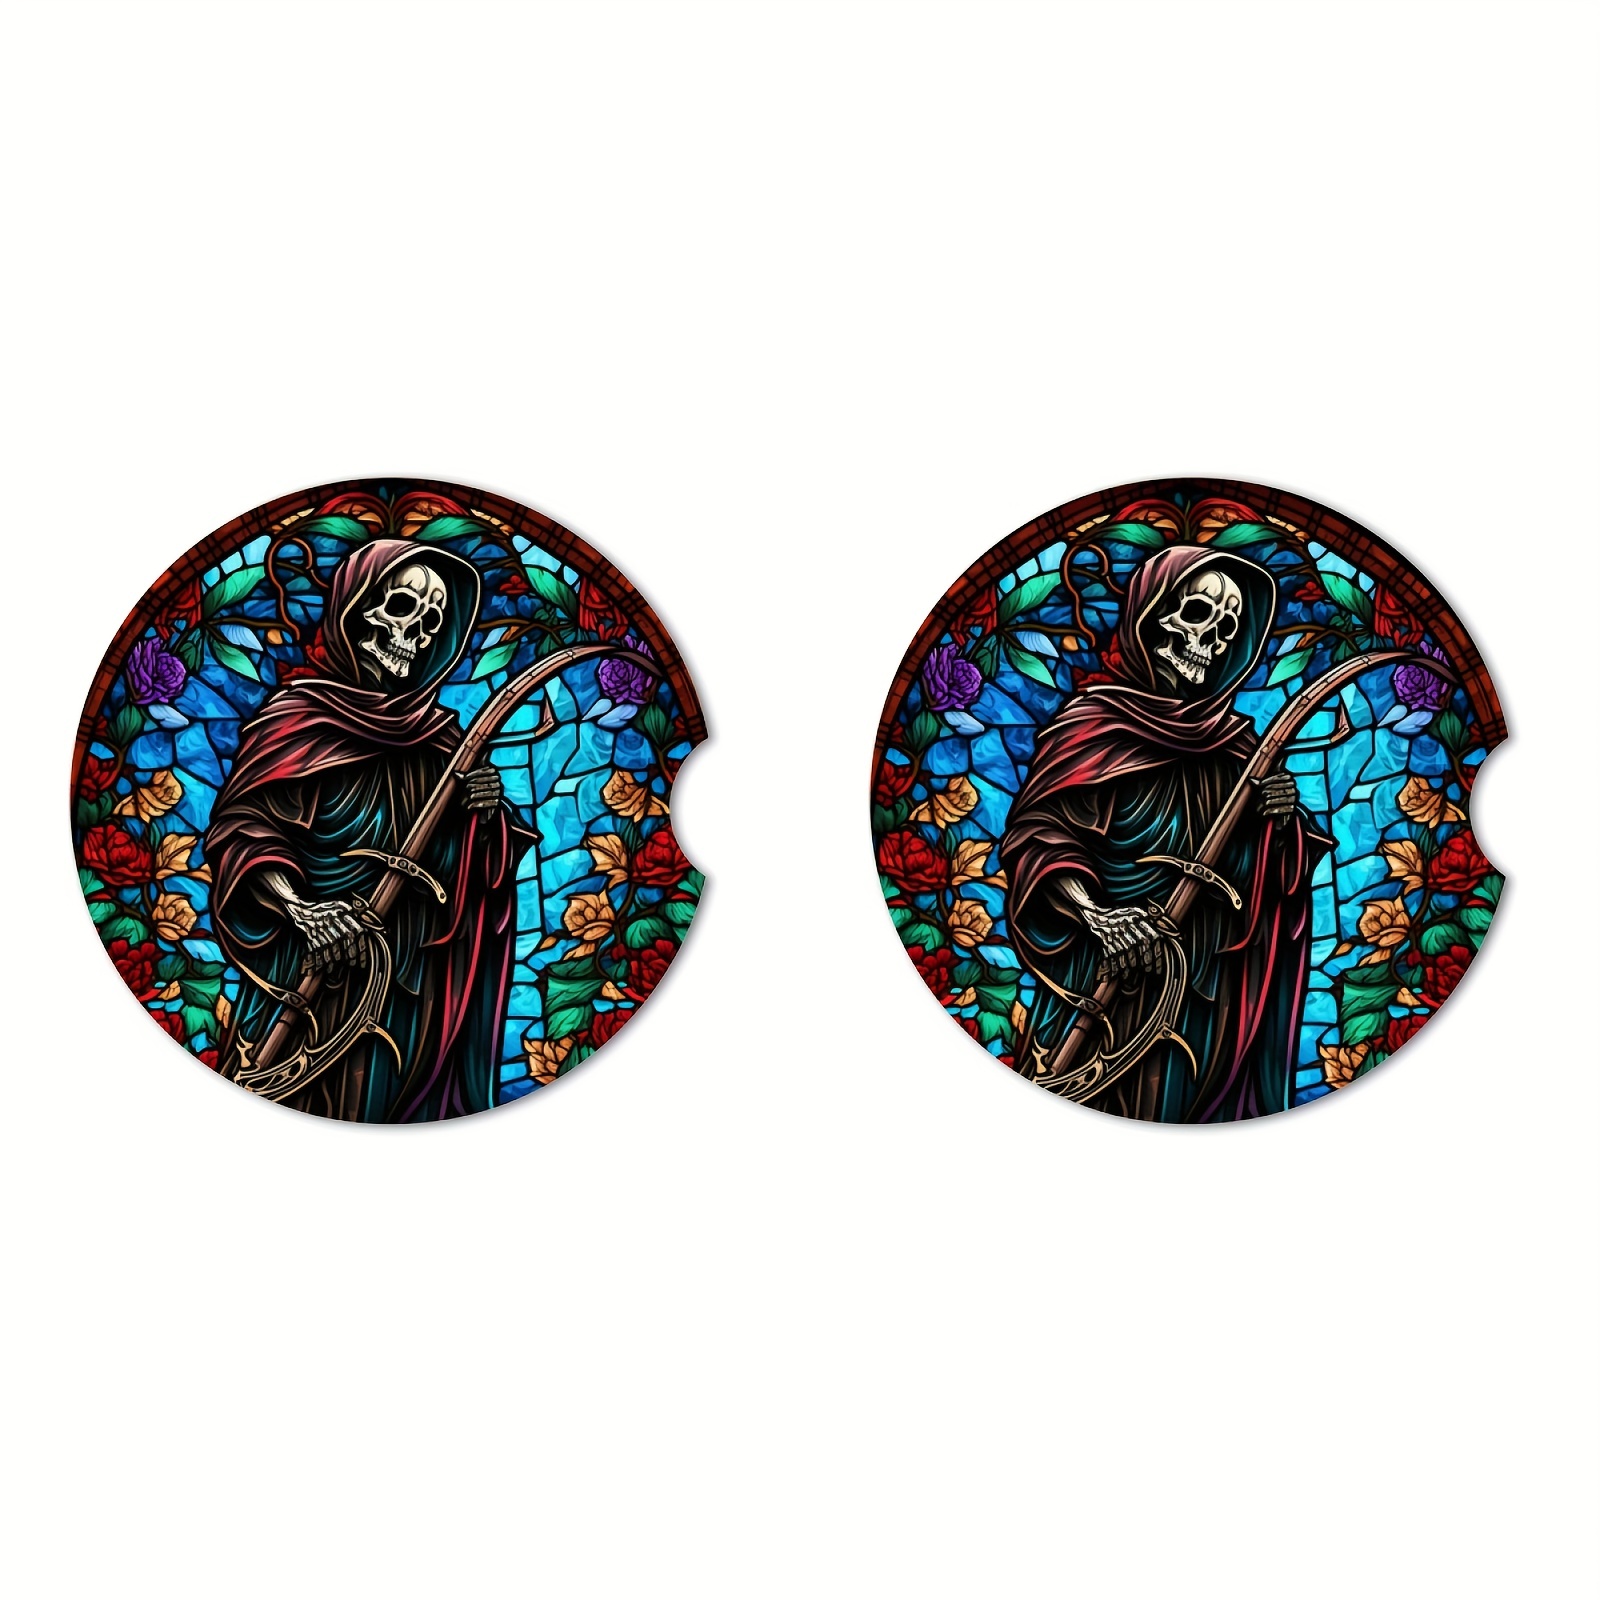 Stained Glass Sugar Skulls Car Coaster